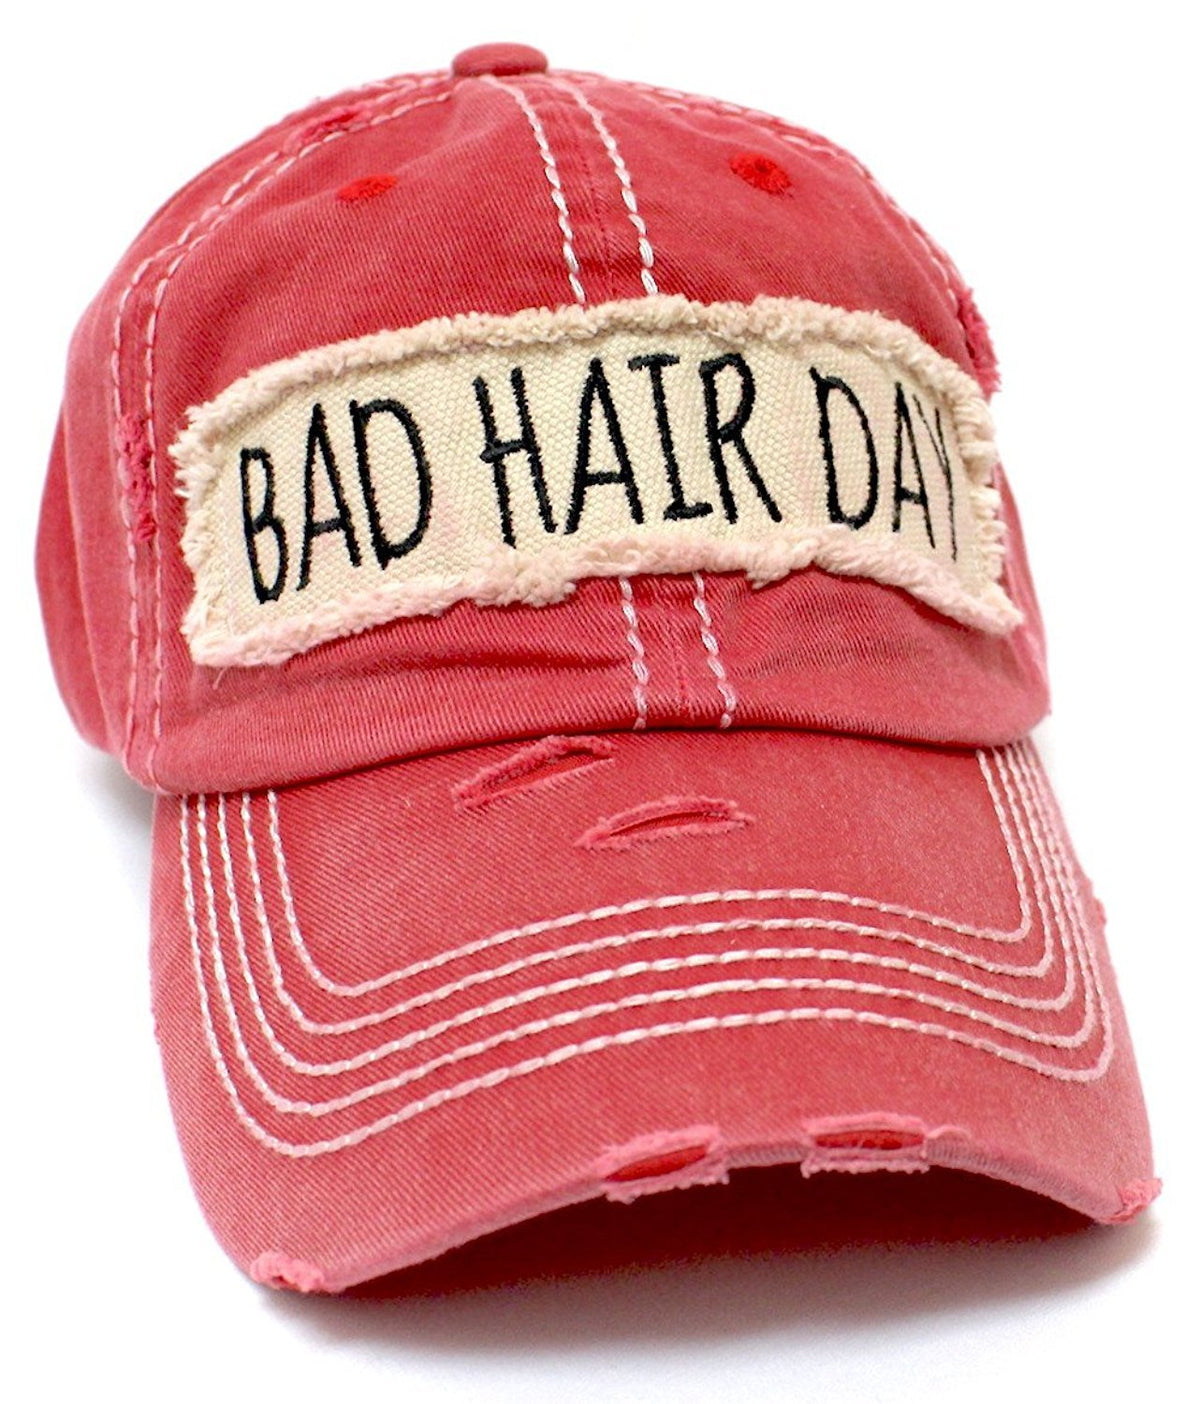 NEW!! RED "BAD HAIR DAY" Patch Embroidery Baseball Hat - Caps 'N Vintage 